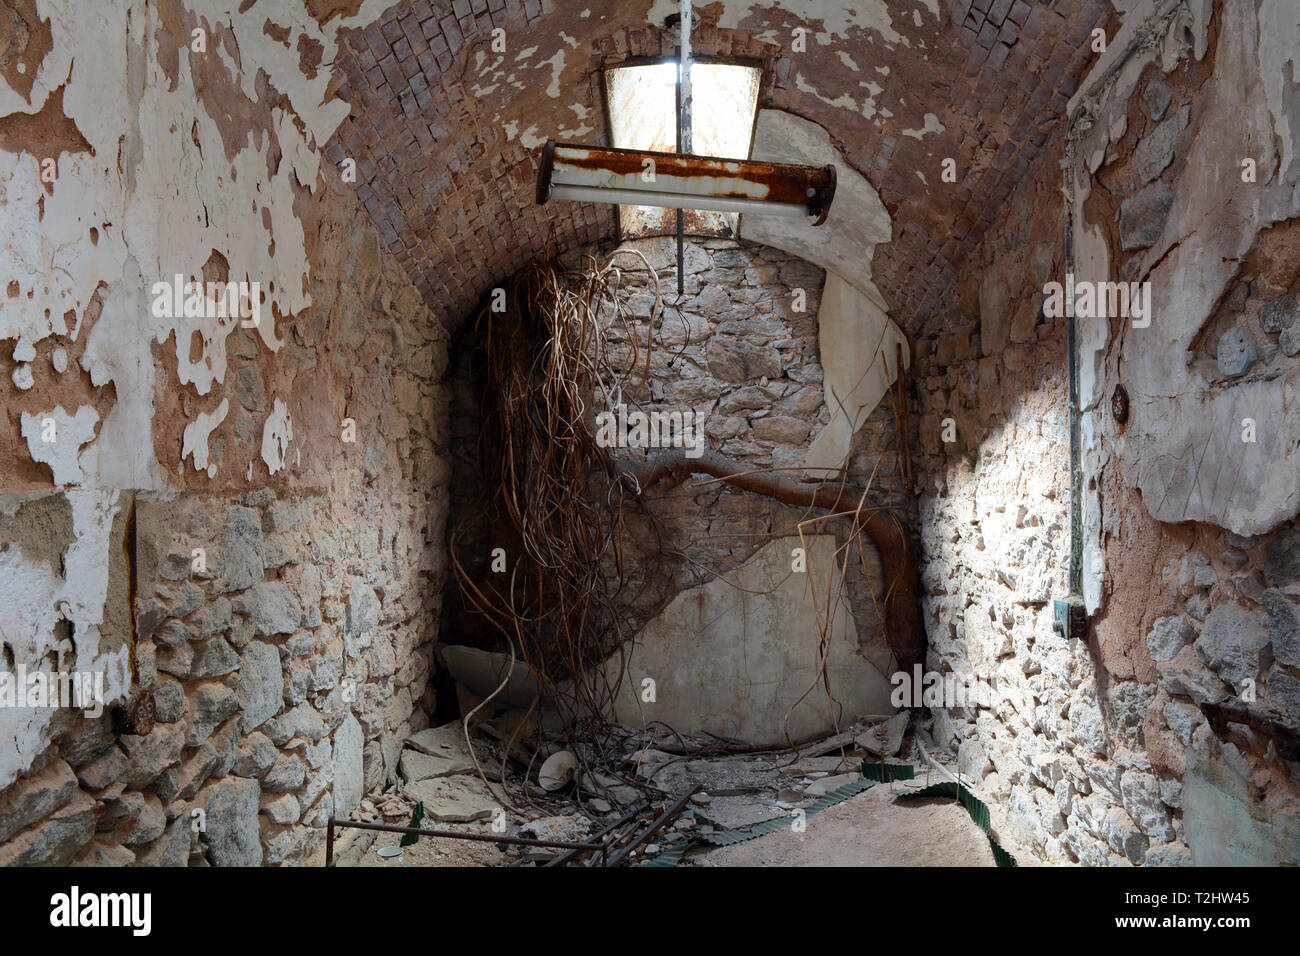 Eastern State Penitentiary - Abandoned Jail Cell With Tree Roots Growing Through a Crumbling Wall Stock Photo